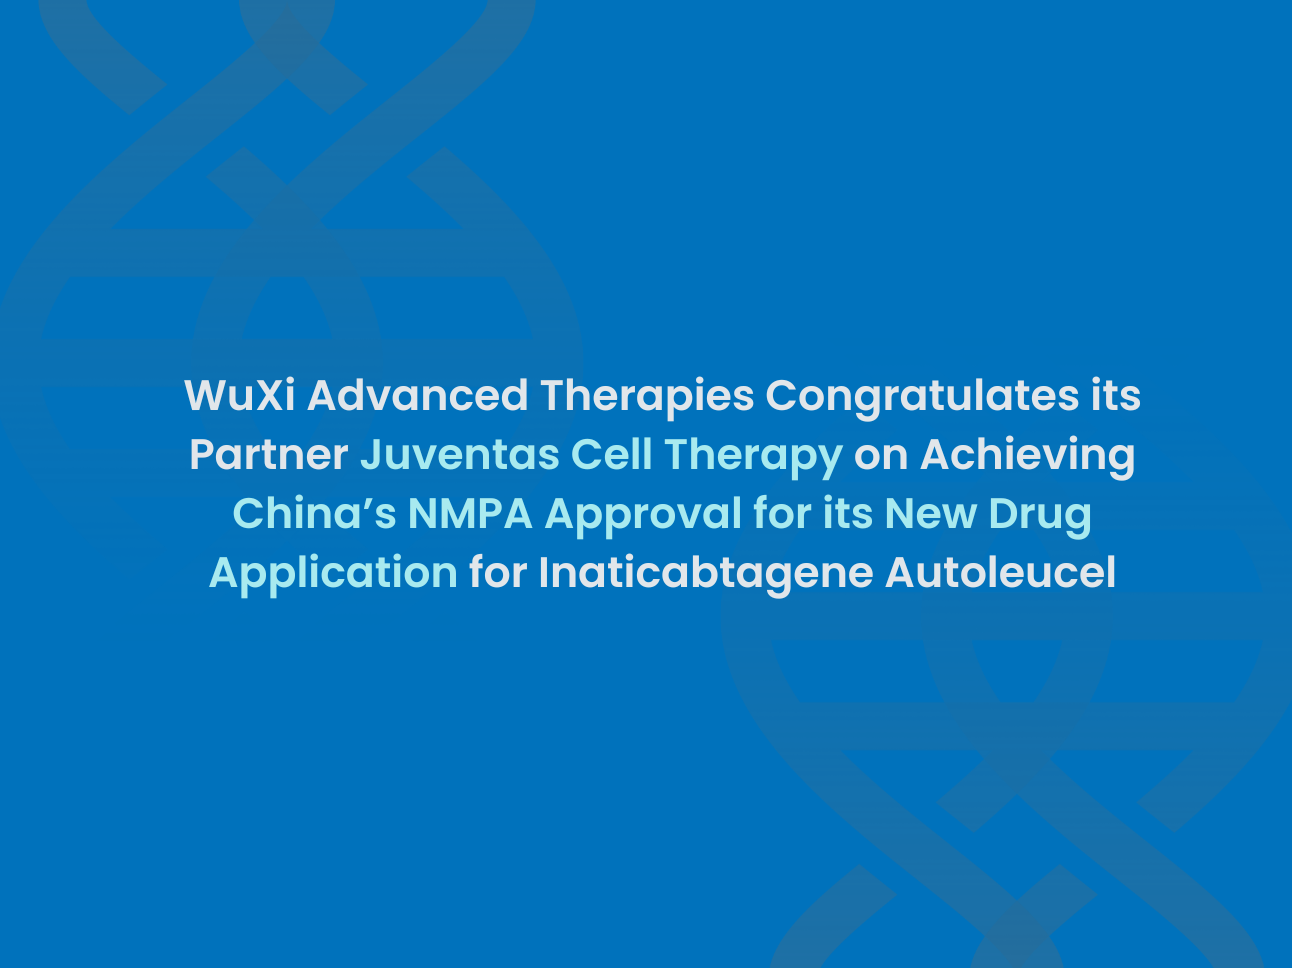 WuXi Advanced Therapies Supports First Investigational CD19 CAR-T Therapy Approved by China’s NMPA